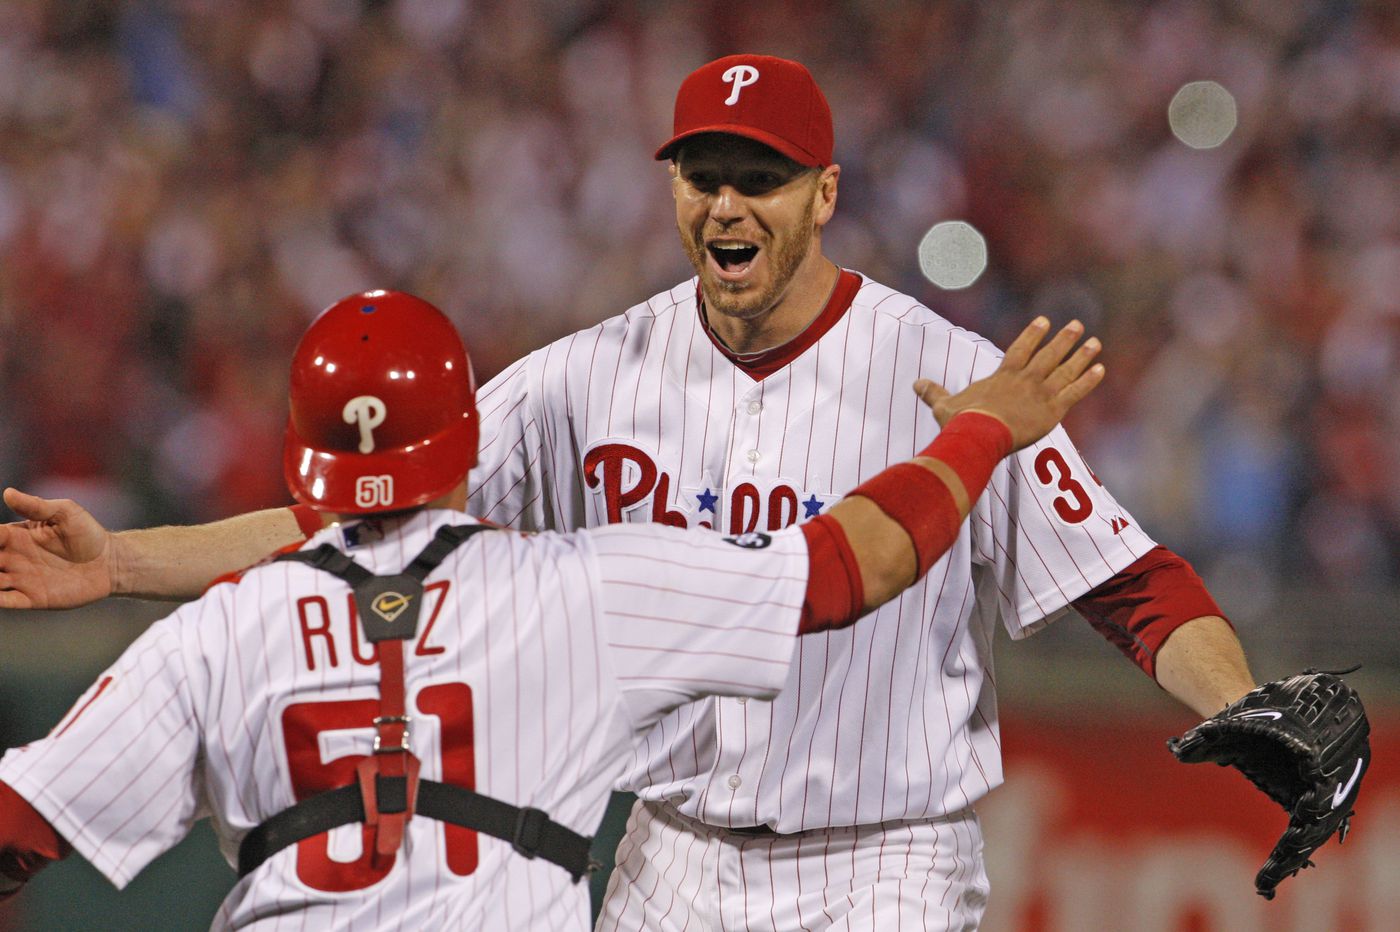 Roy Halladay S Baseball Hall Of Fame Induction Figures To Be